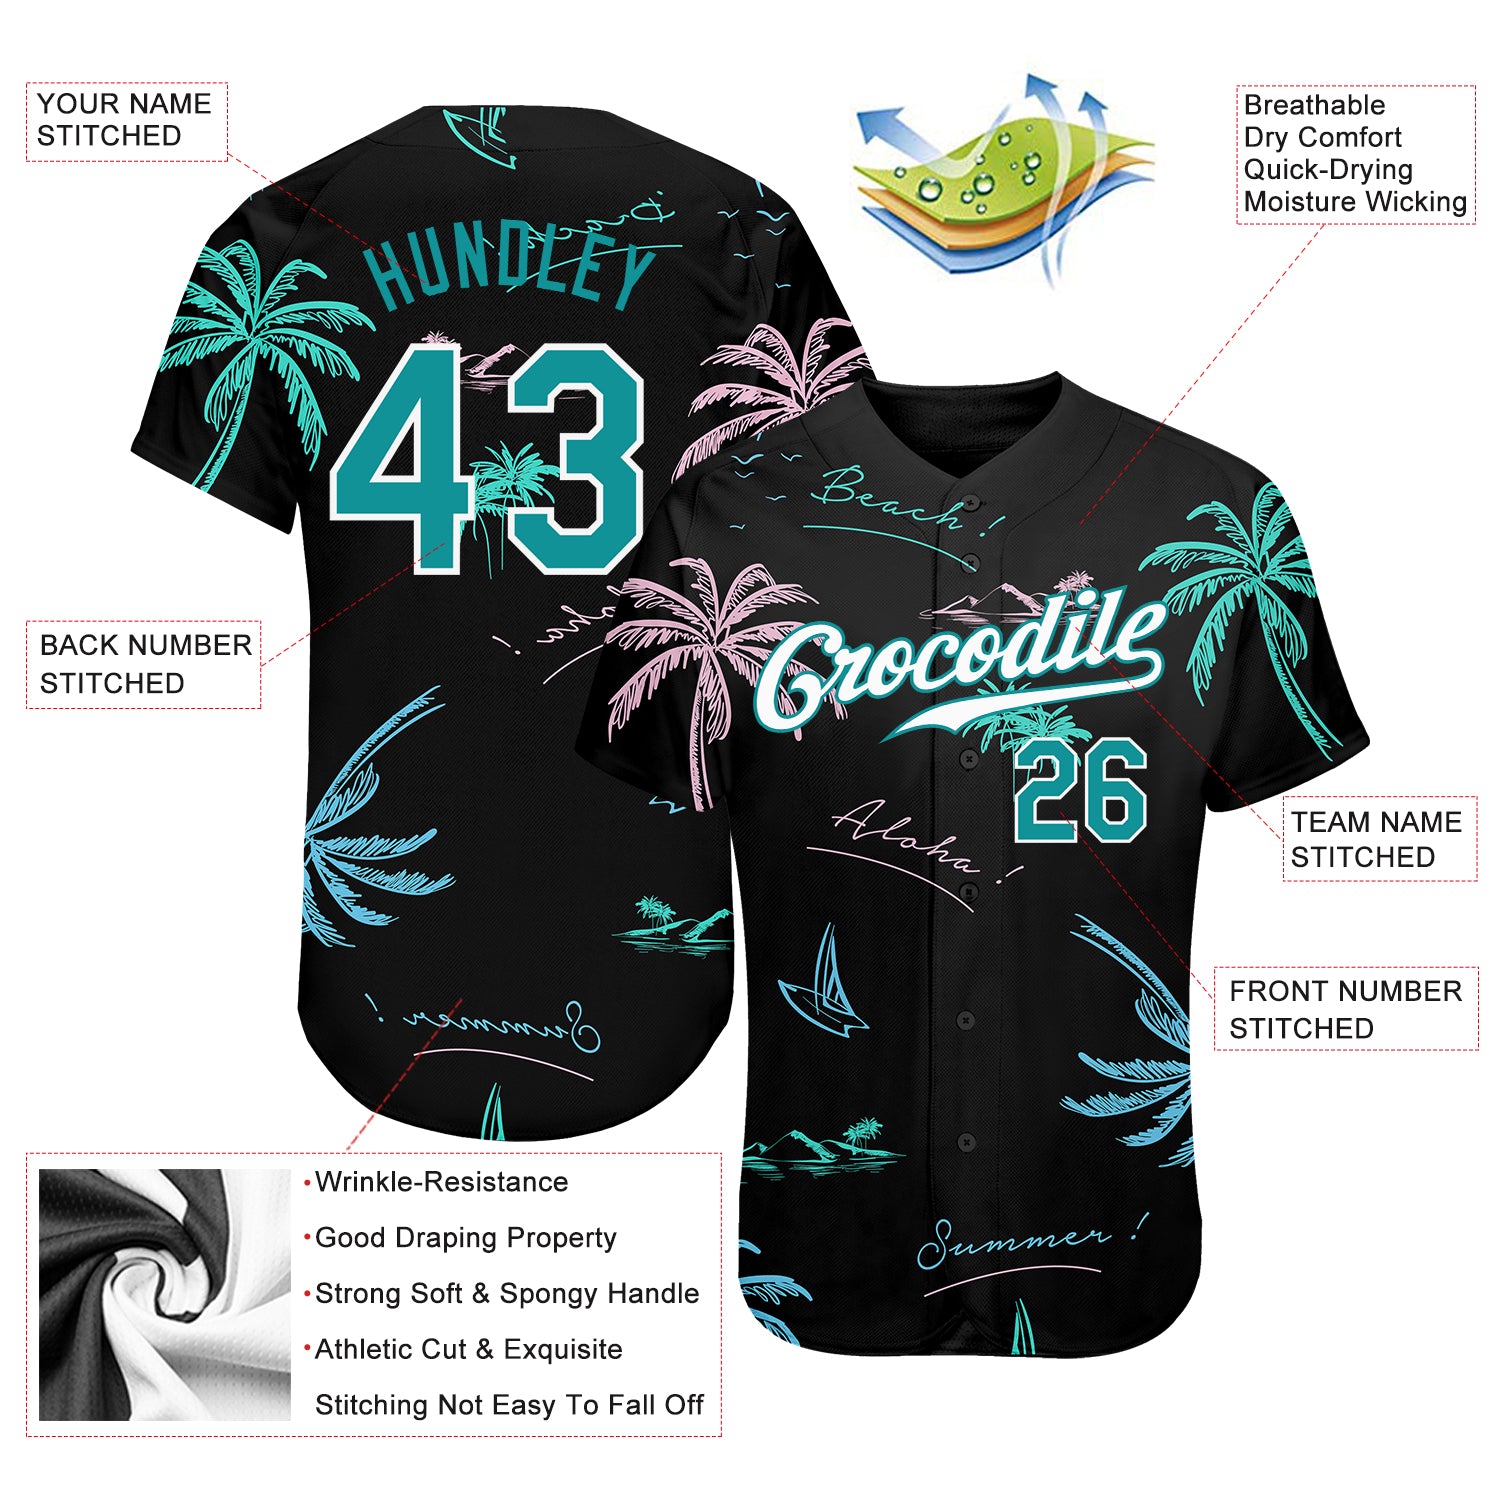 Comparing Miami Marlins Throwback Teal jerseys to other great